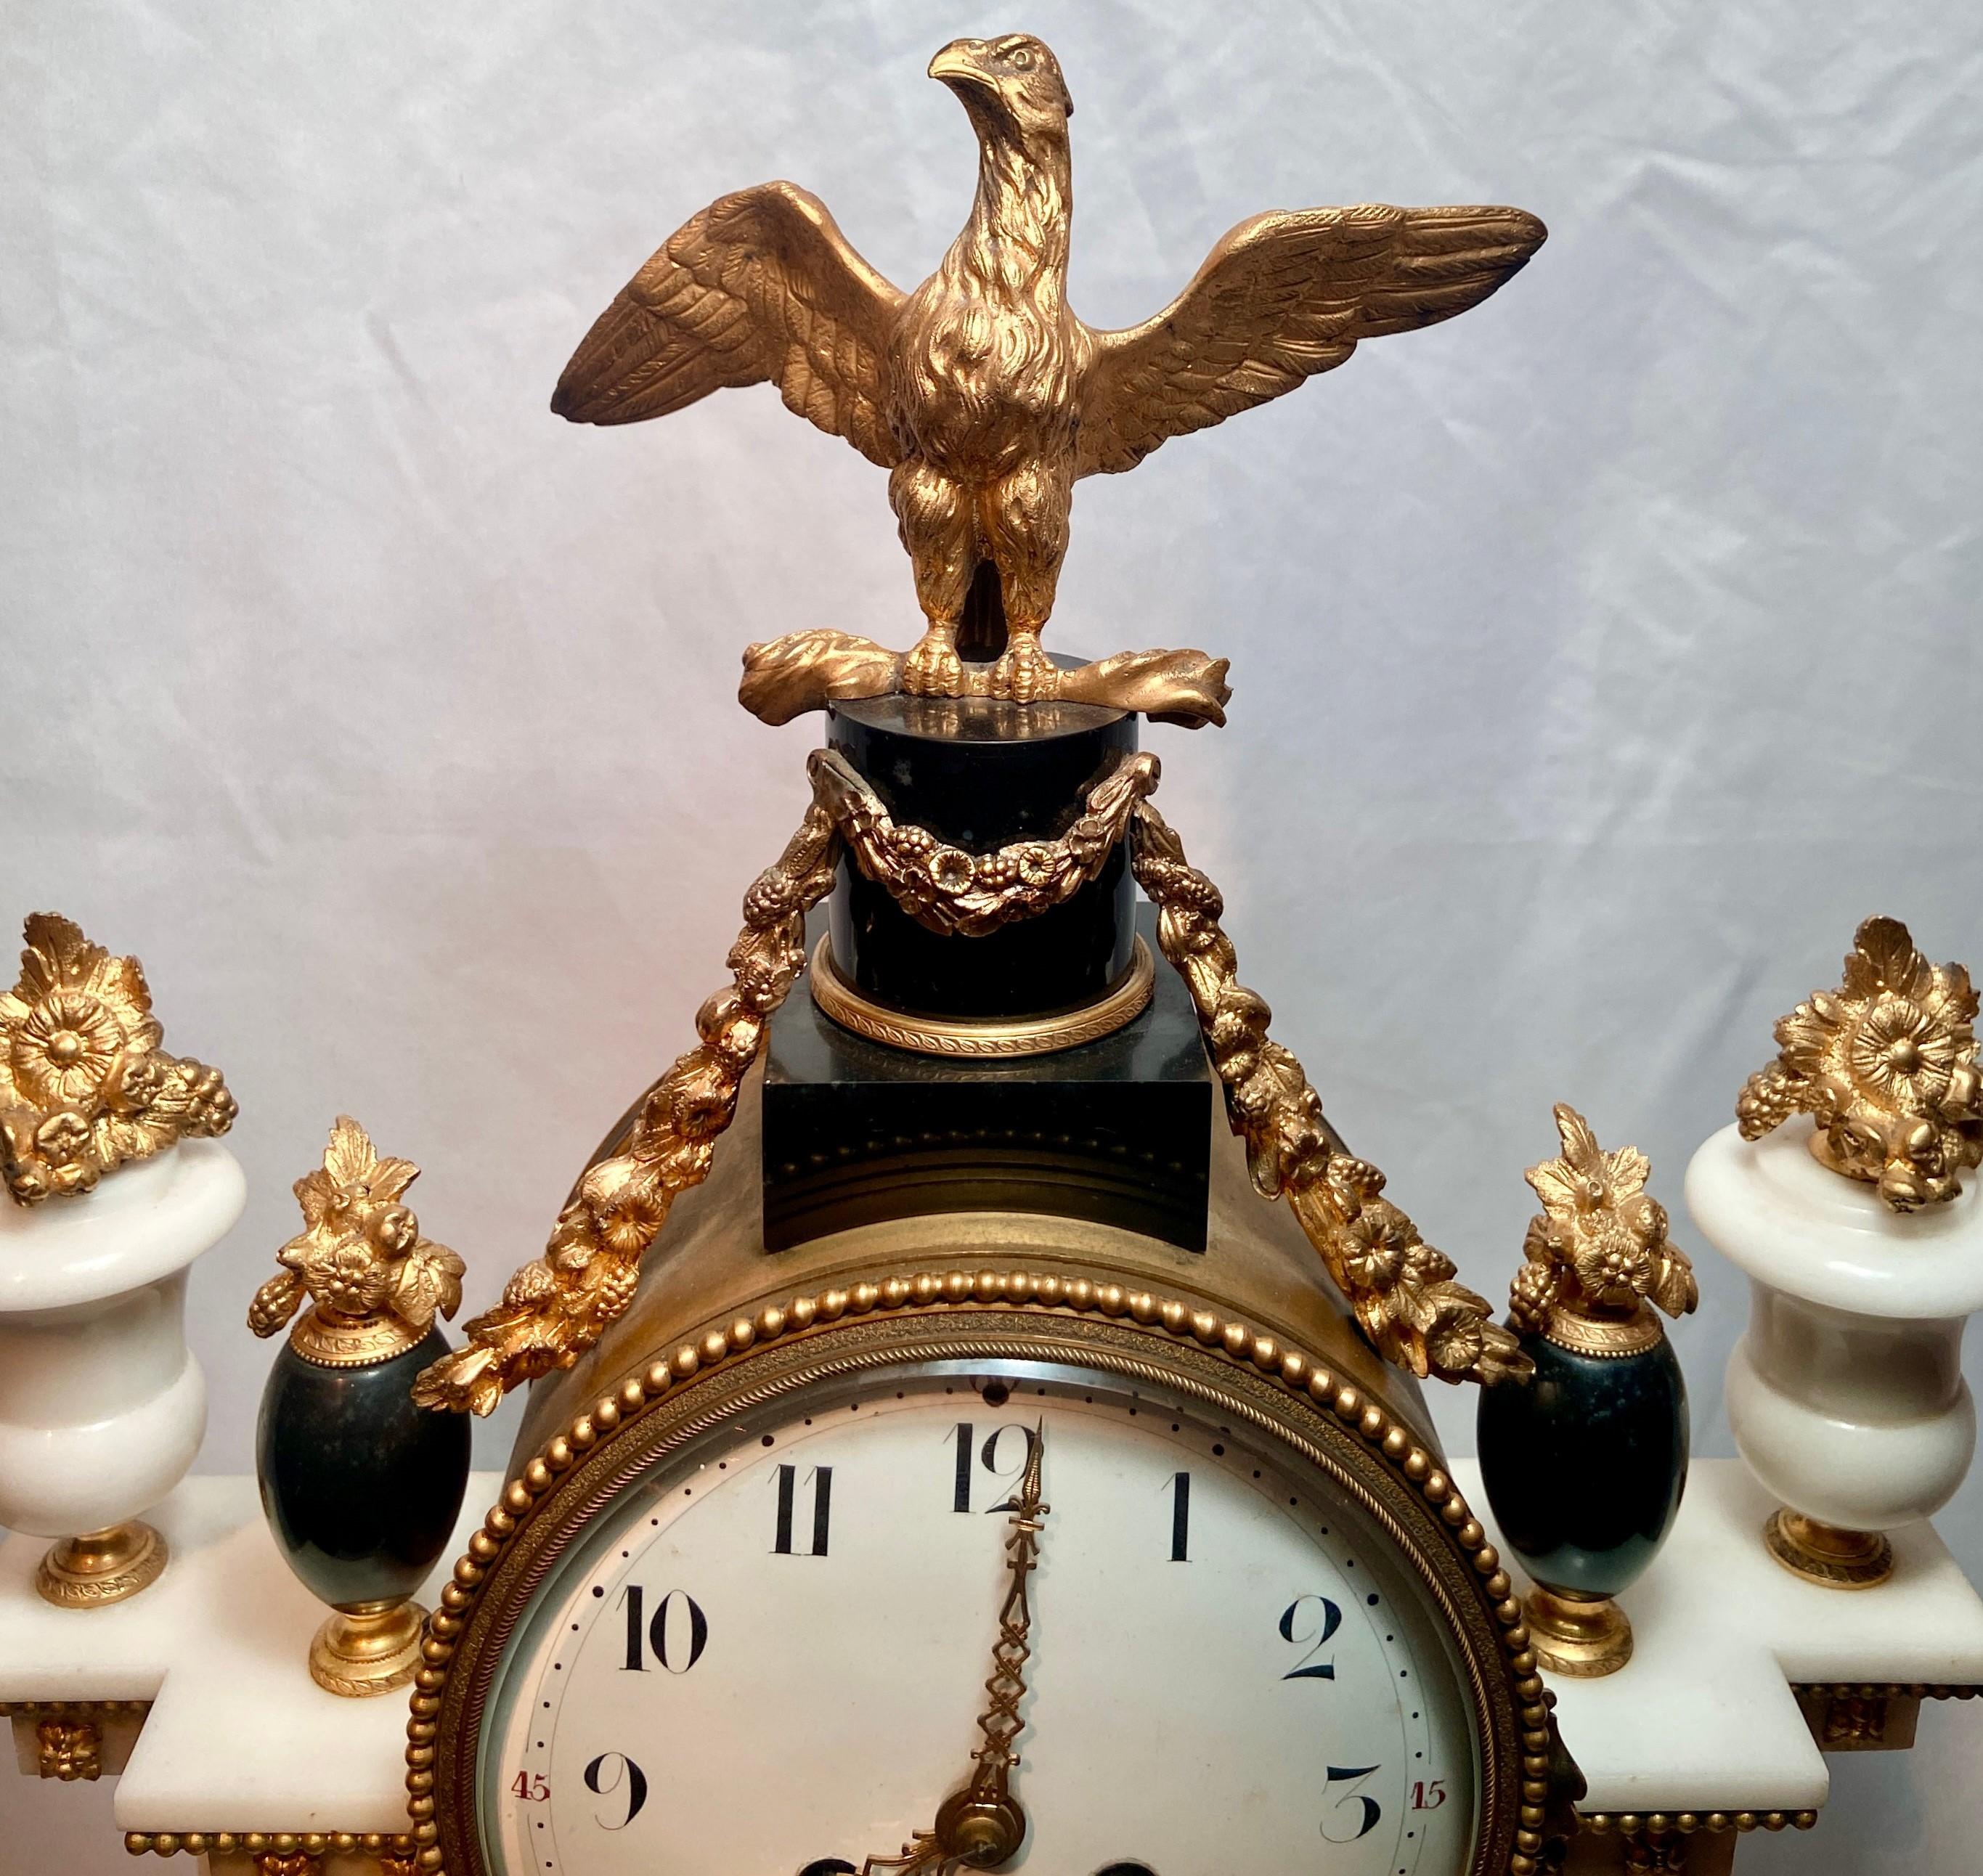 Antique French Louis XVI Finest Ormolu and Marble Mantel Clock, circa 1850-1860.